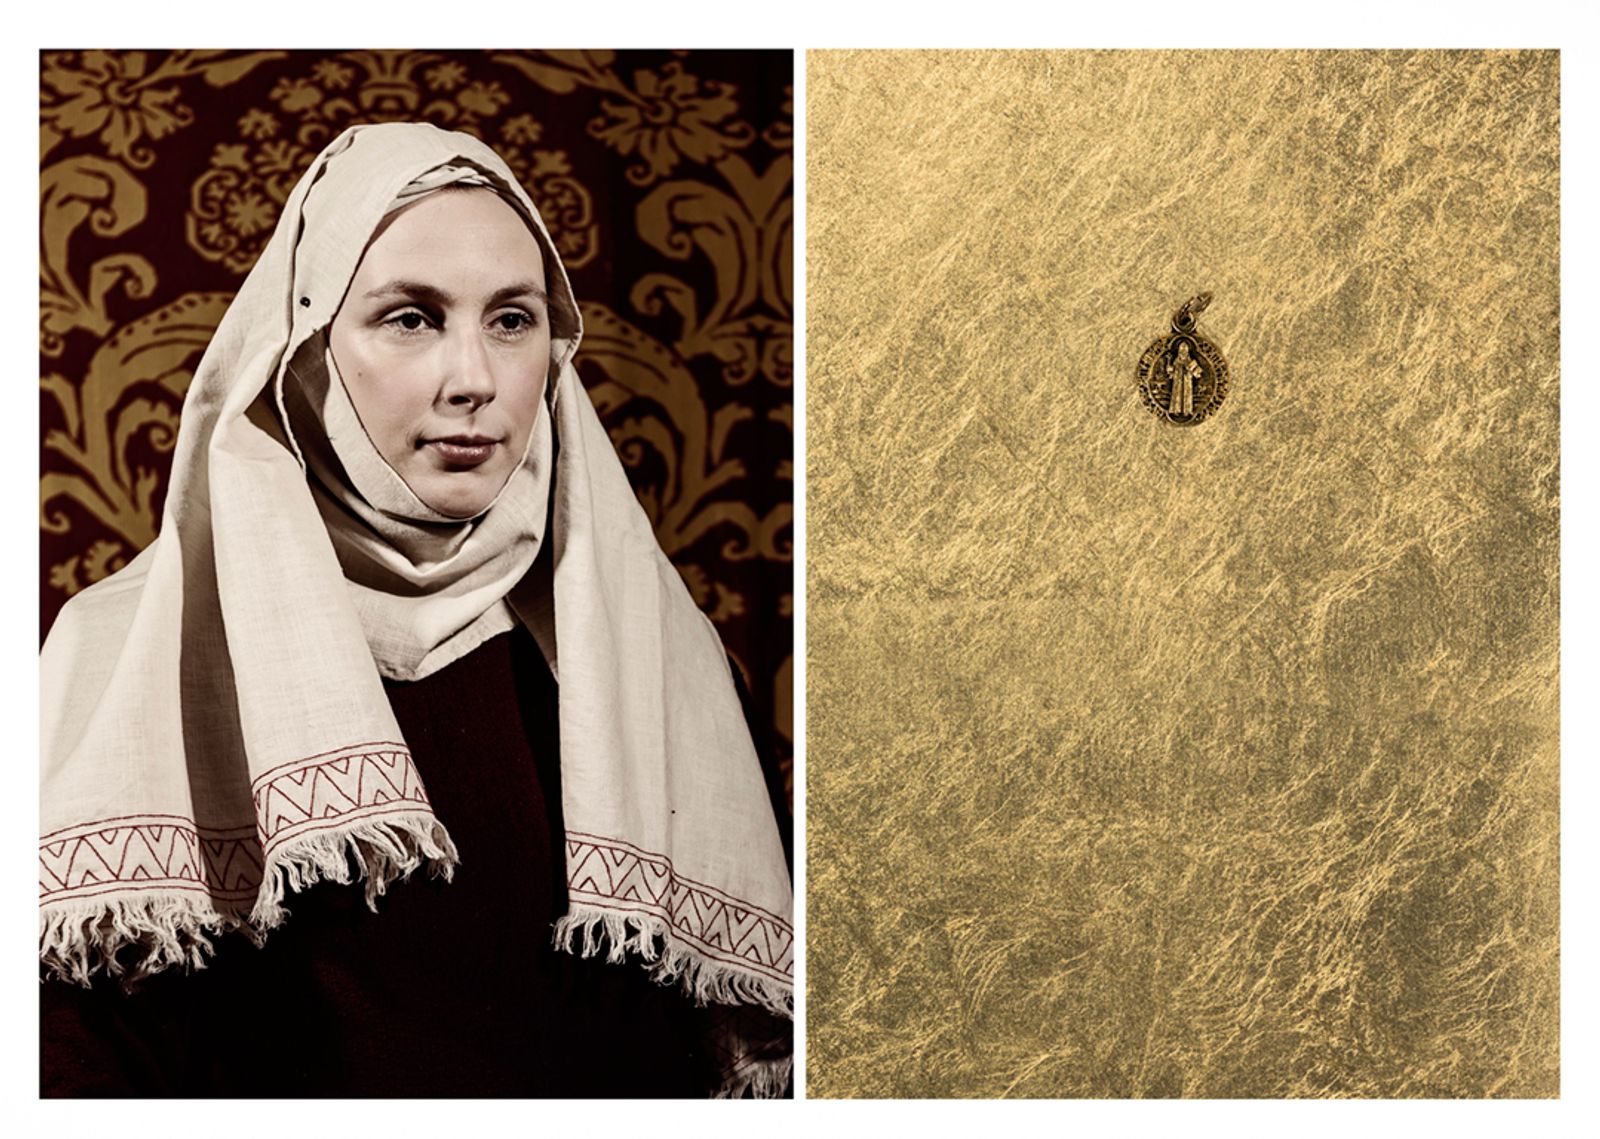 © Nicoletta Cerasomma - In memory of Lucrezia Buonvisi - A woman divided between faith and love